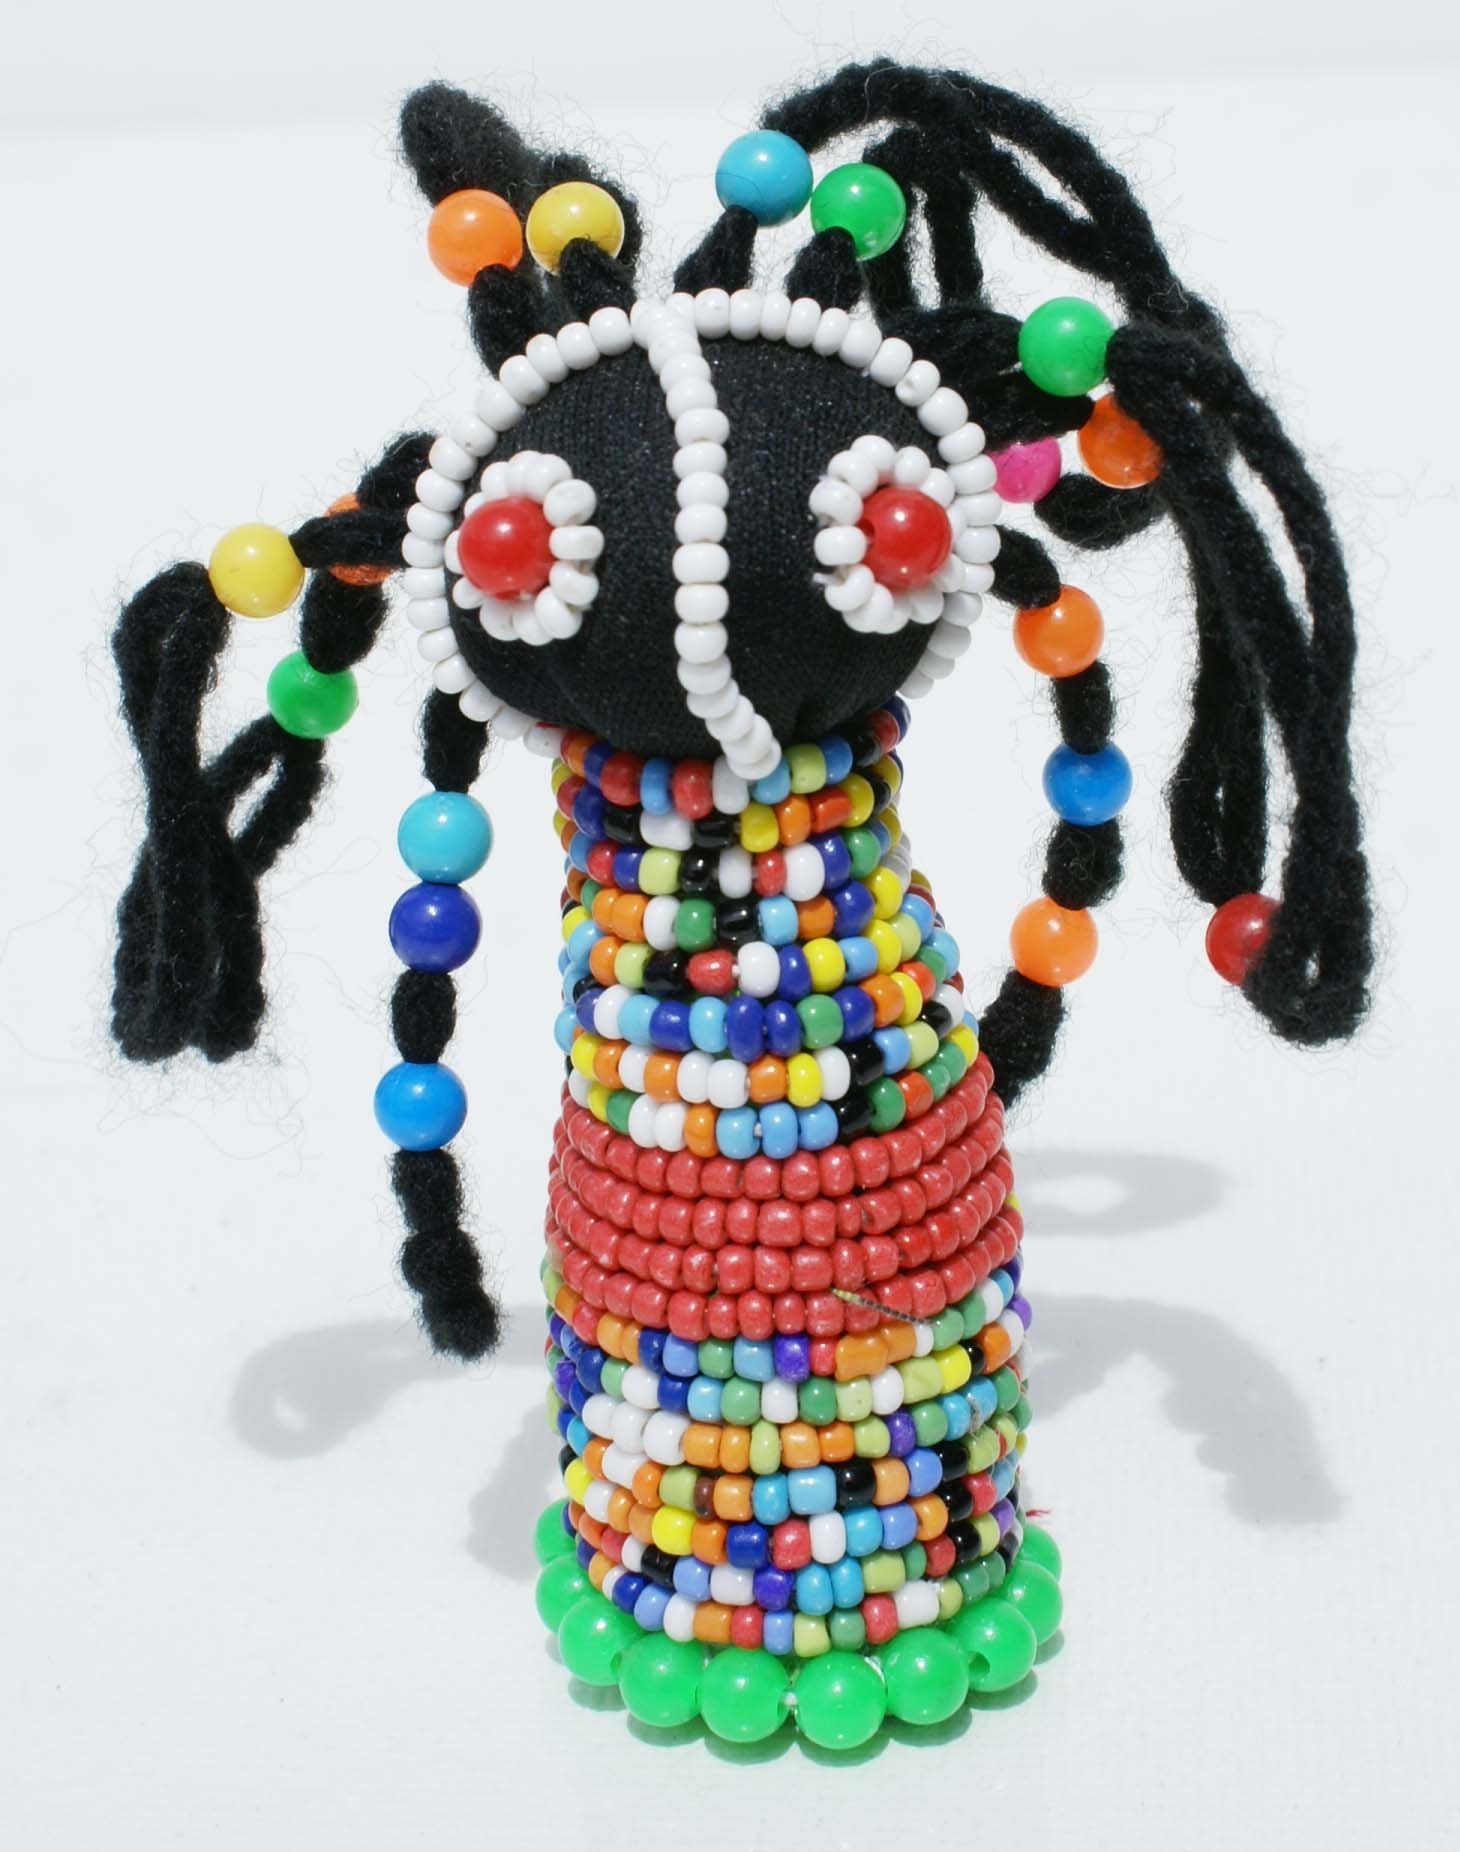 Ndebele Doll Handcrafted in South Africa, Colorful Beaded Tribal Doll